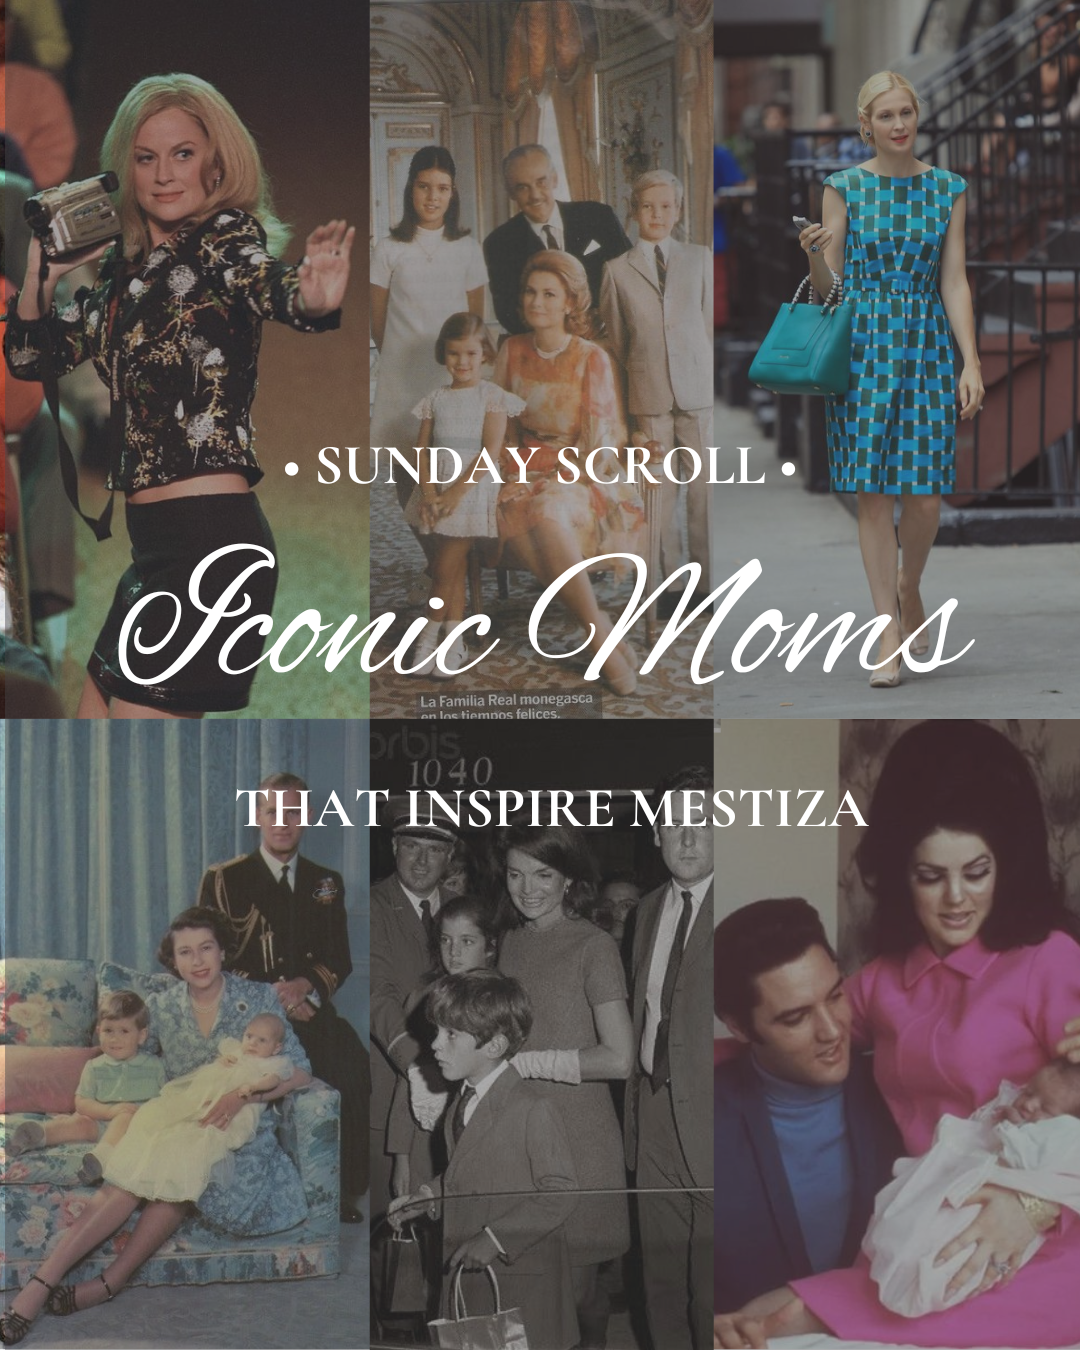 Sunday Scroll: Iconic Mothers